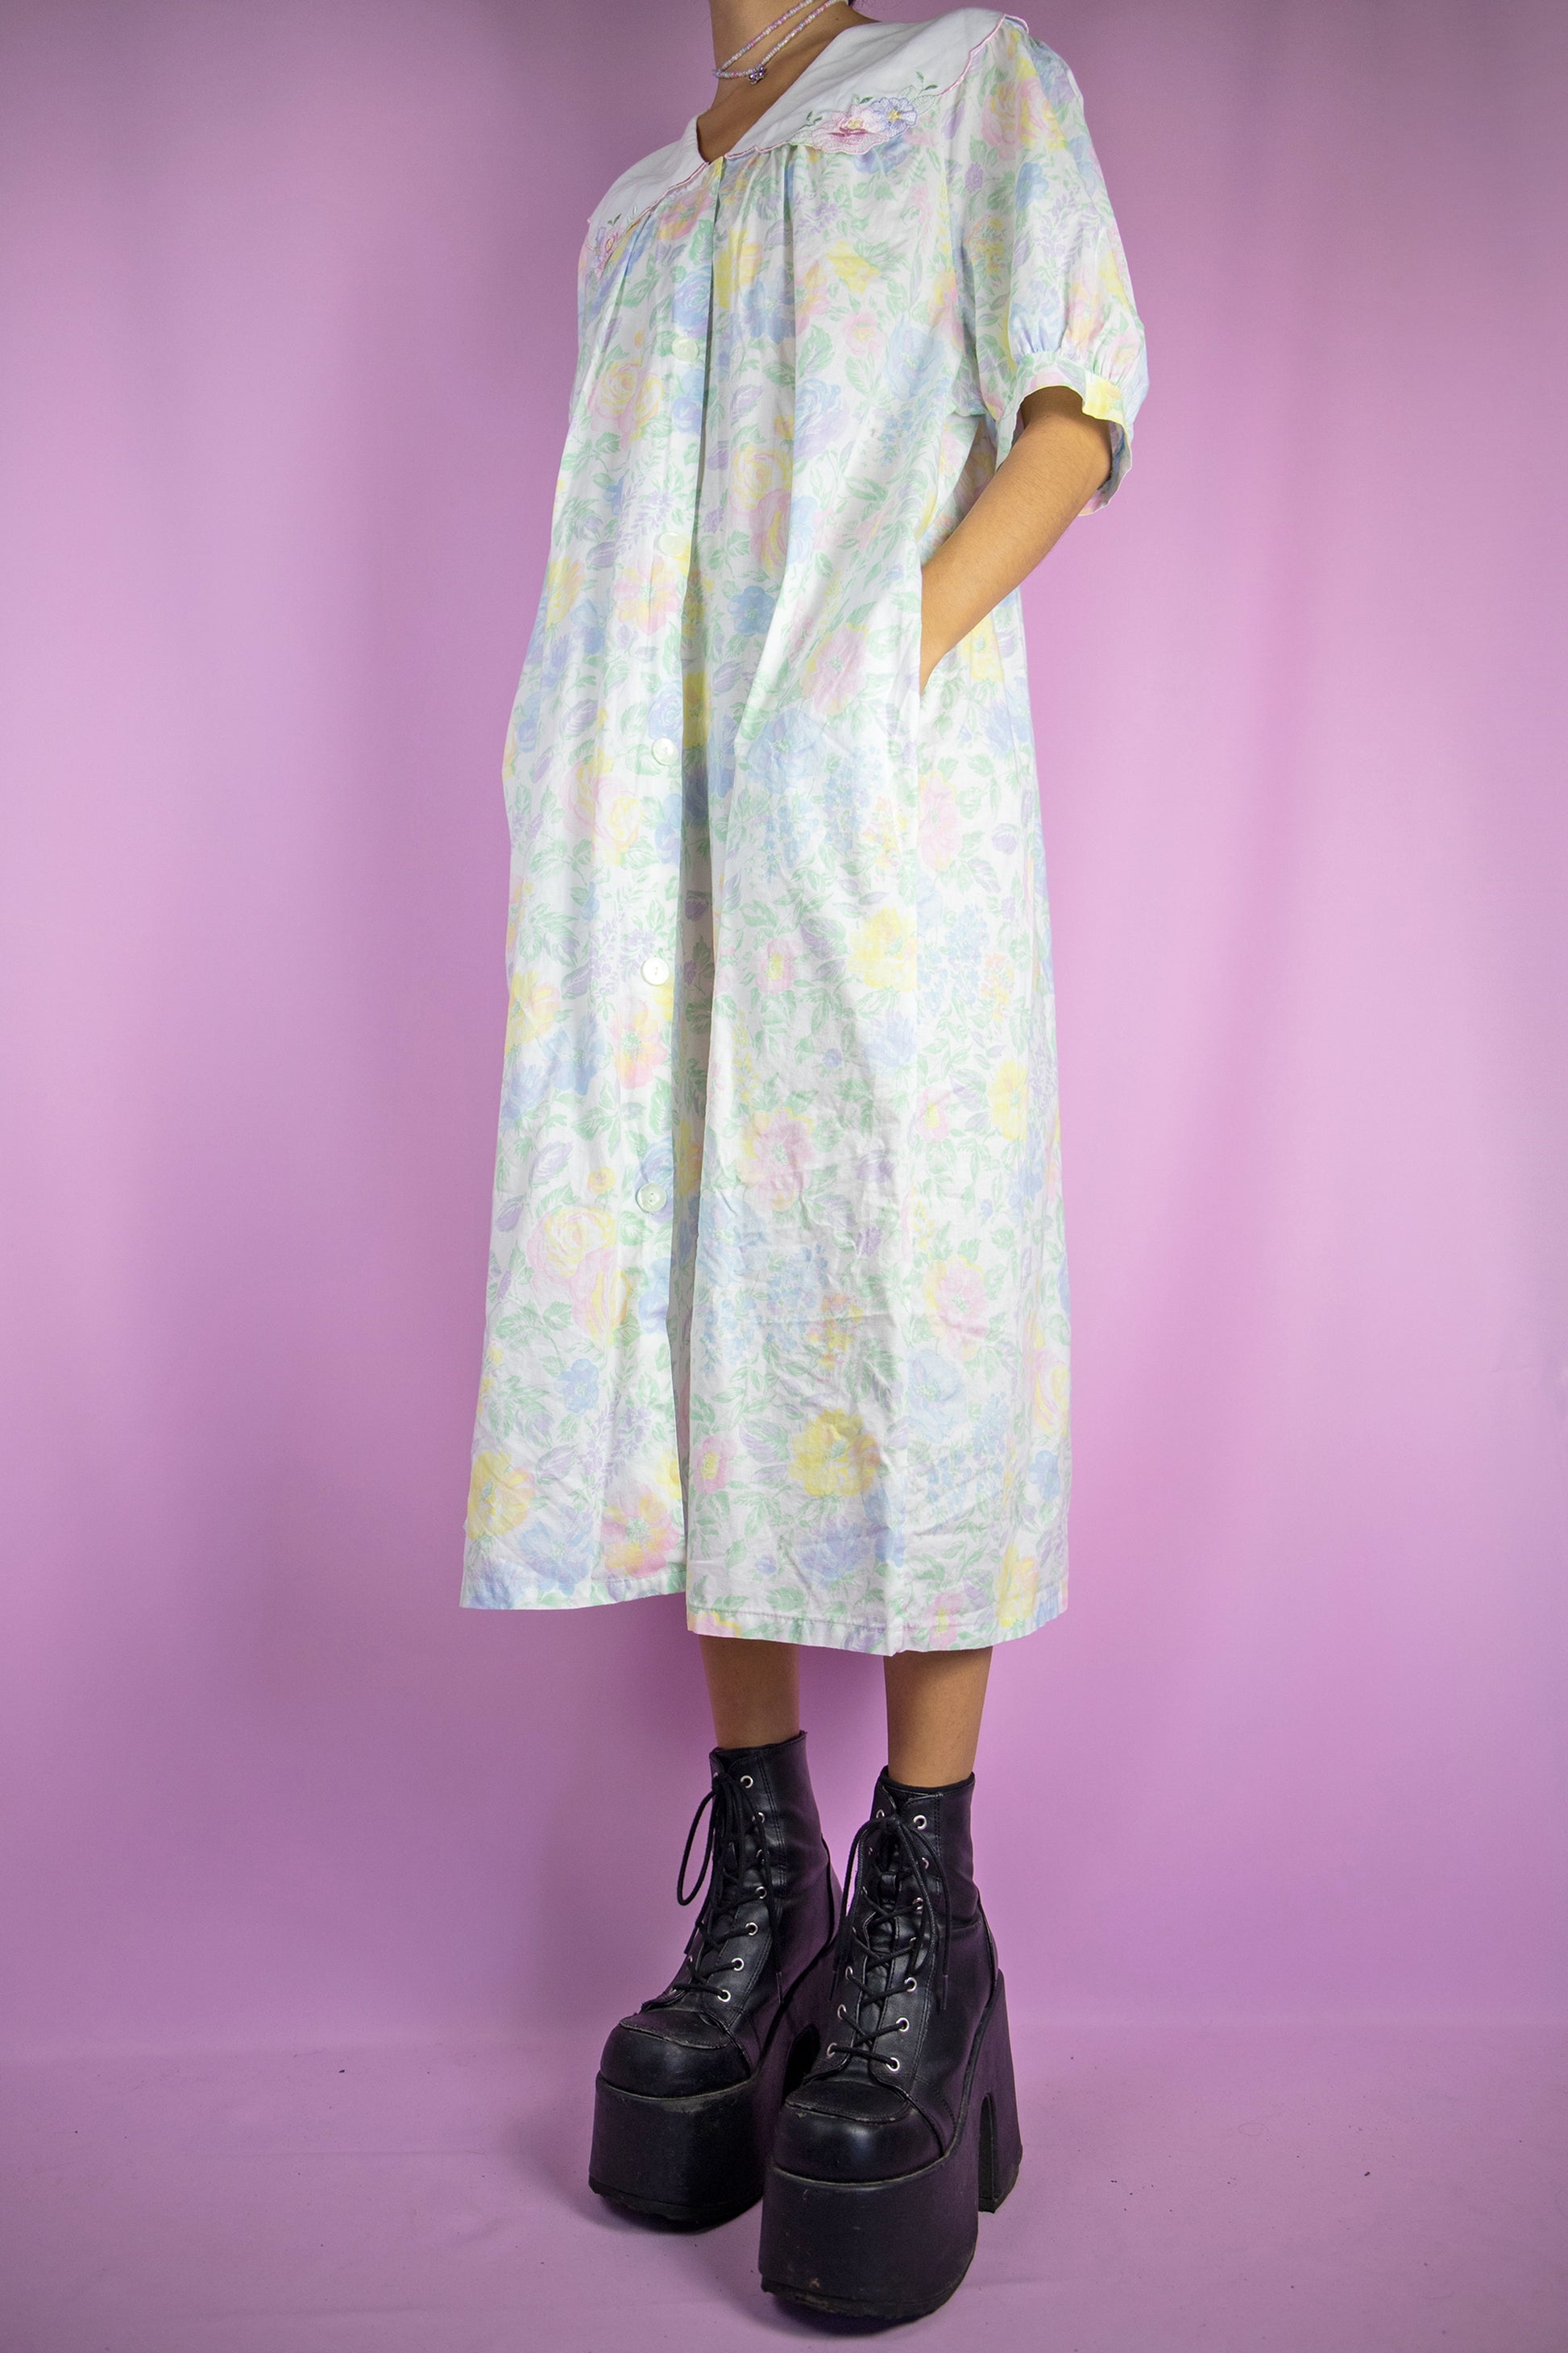 The Vintage 90s White Floral Nightgown Dress is a white multicolor floral collared midi dress with short puff sleeves, buttons and pockets. Gorgeous romantic sleepwear 1990s night dress.